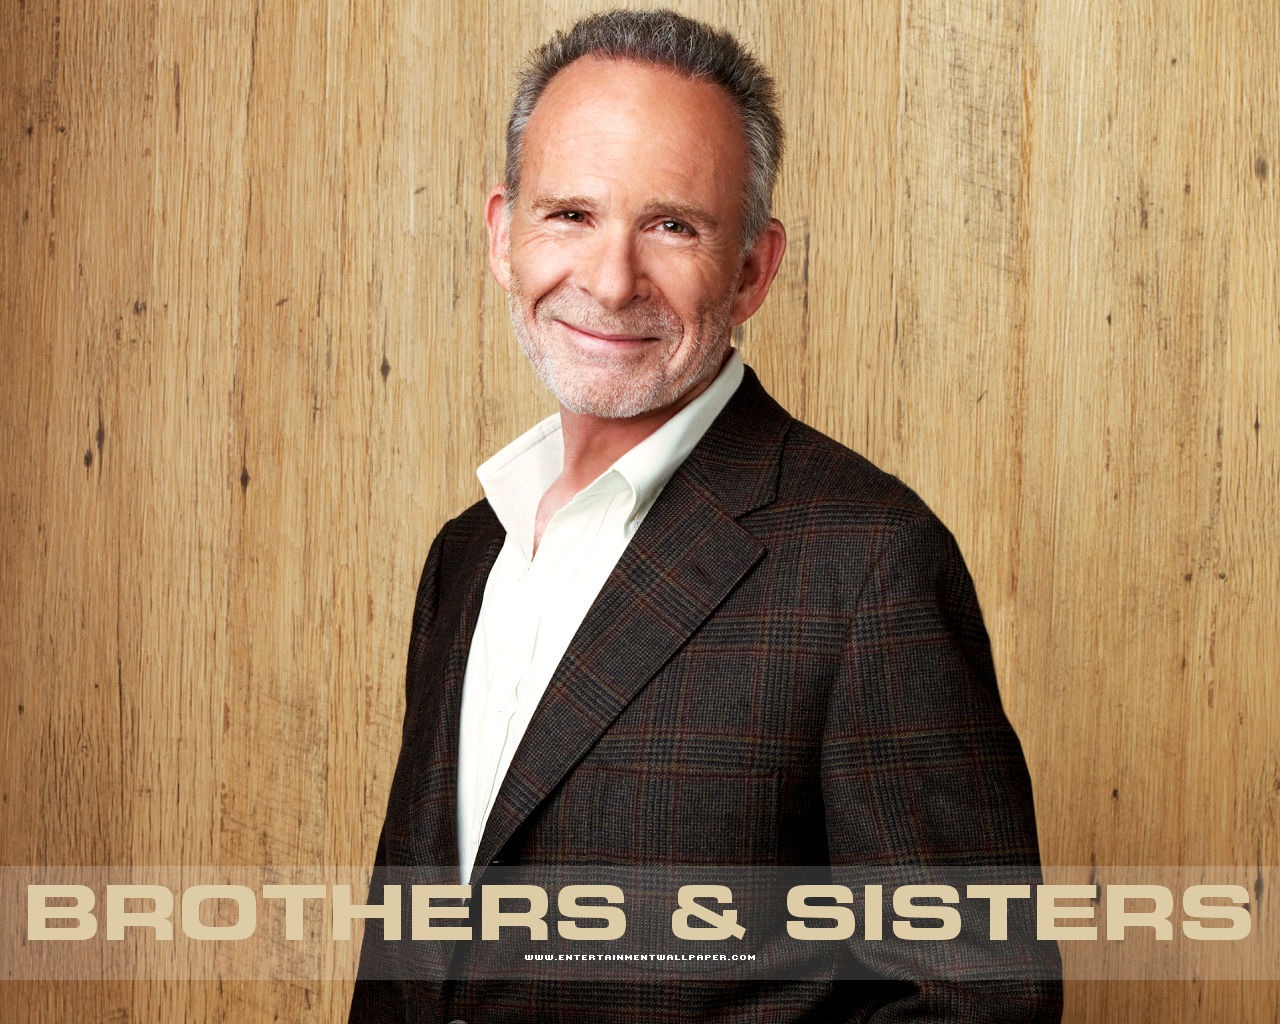 Brothers & Sisters 兄弟姐妹 #21 - 1280x1024